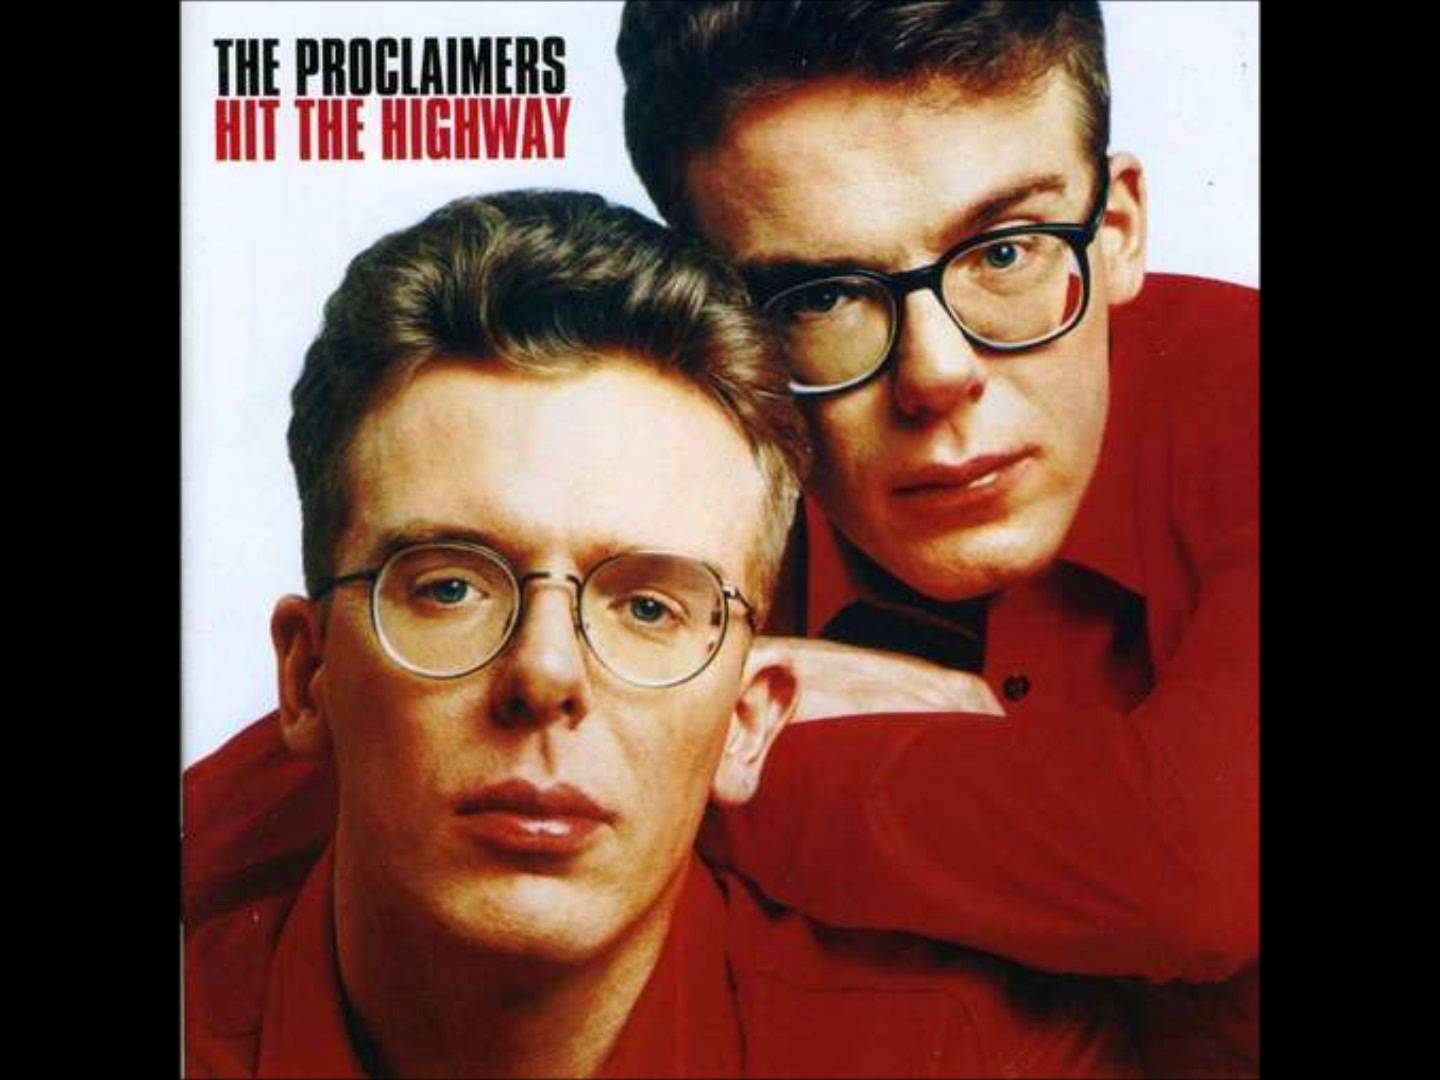 4. The Proclaimers - 500 miles